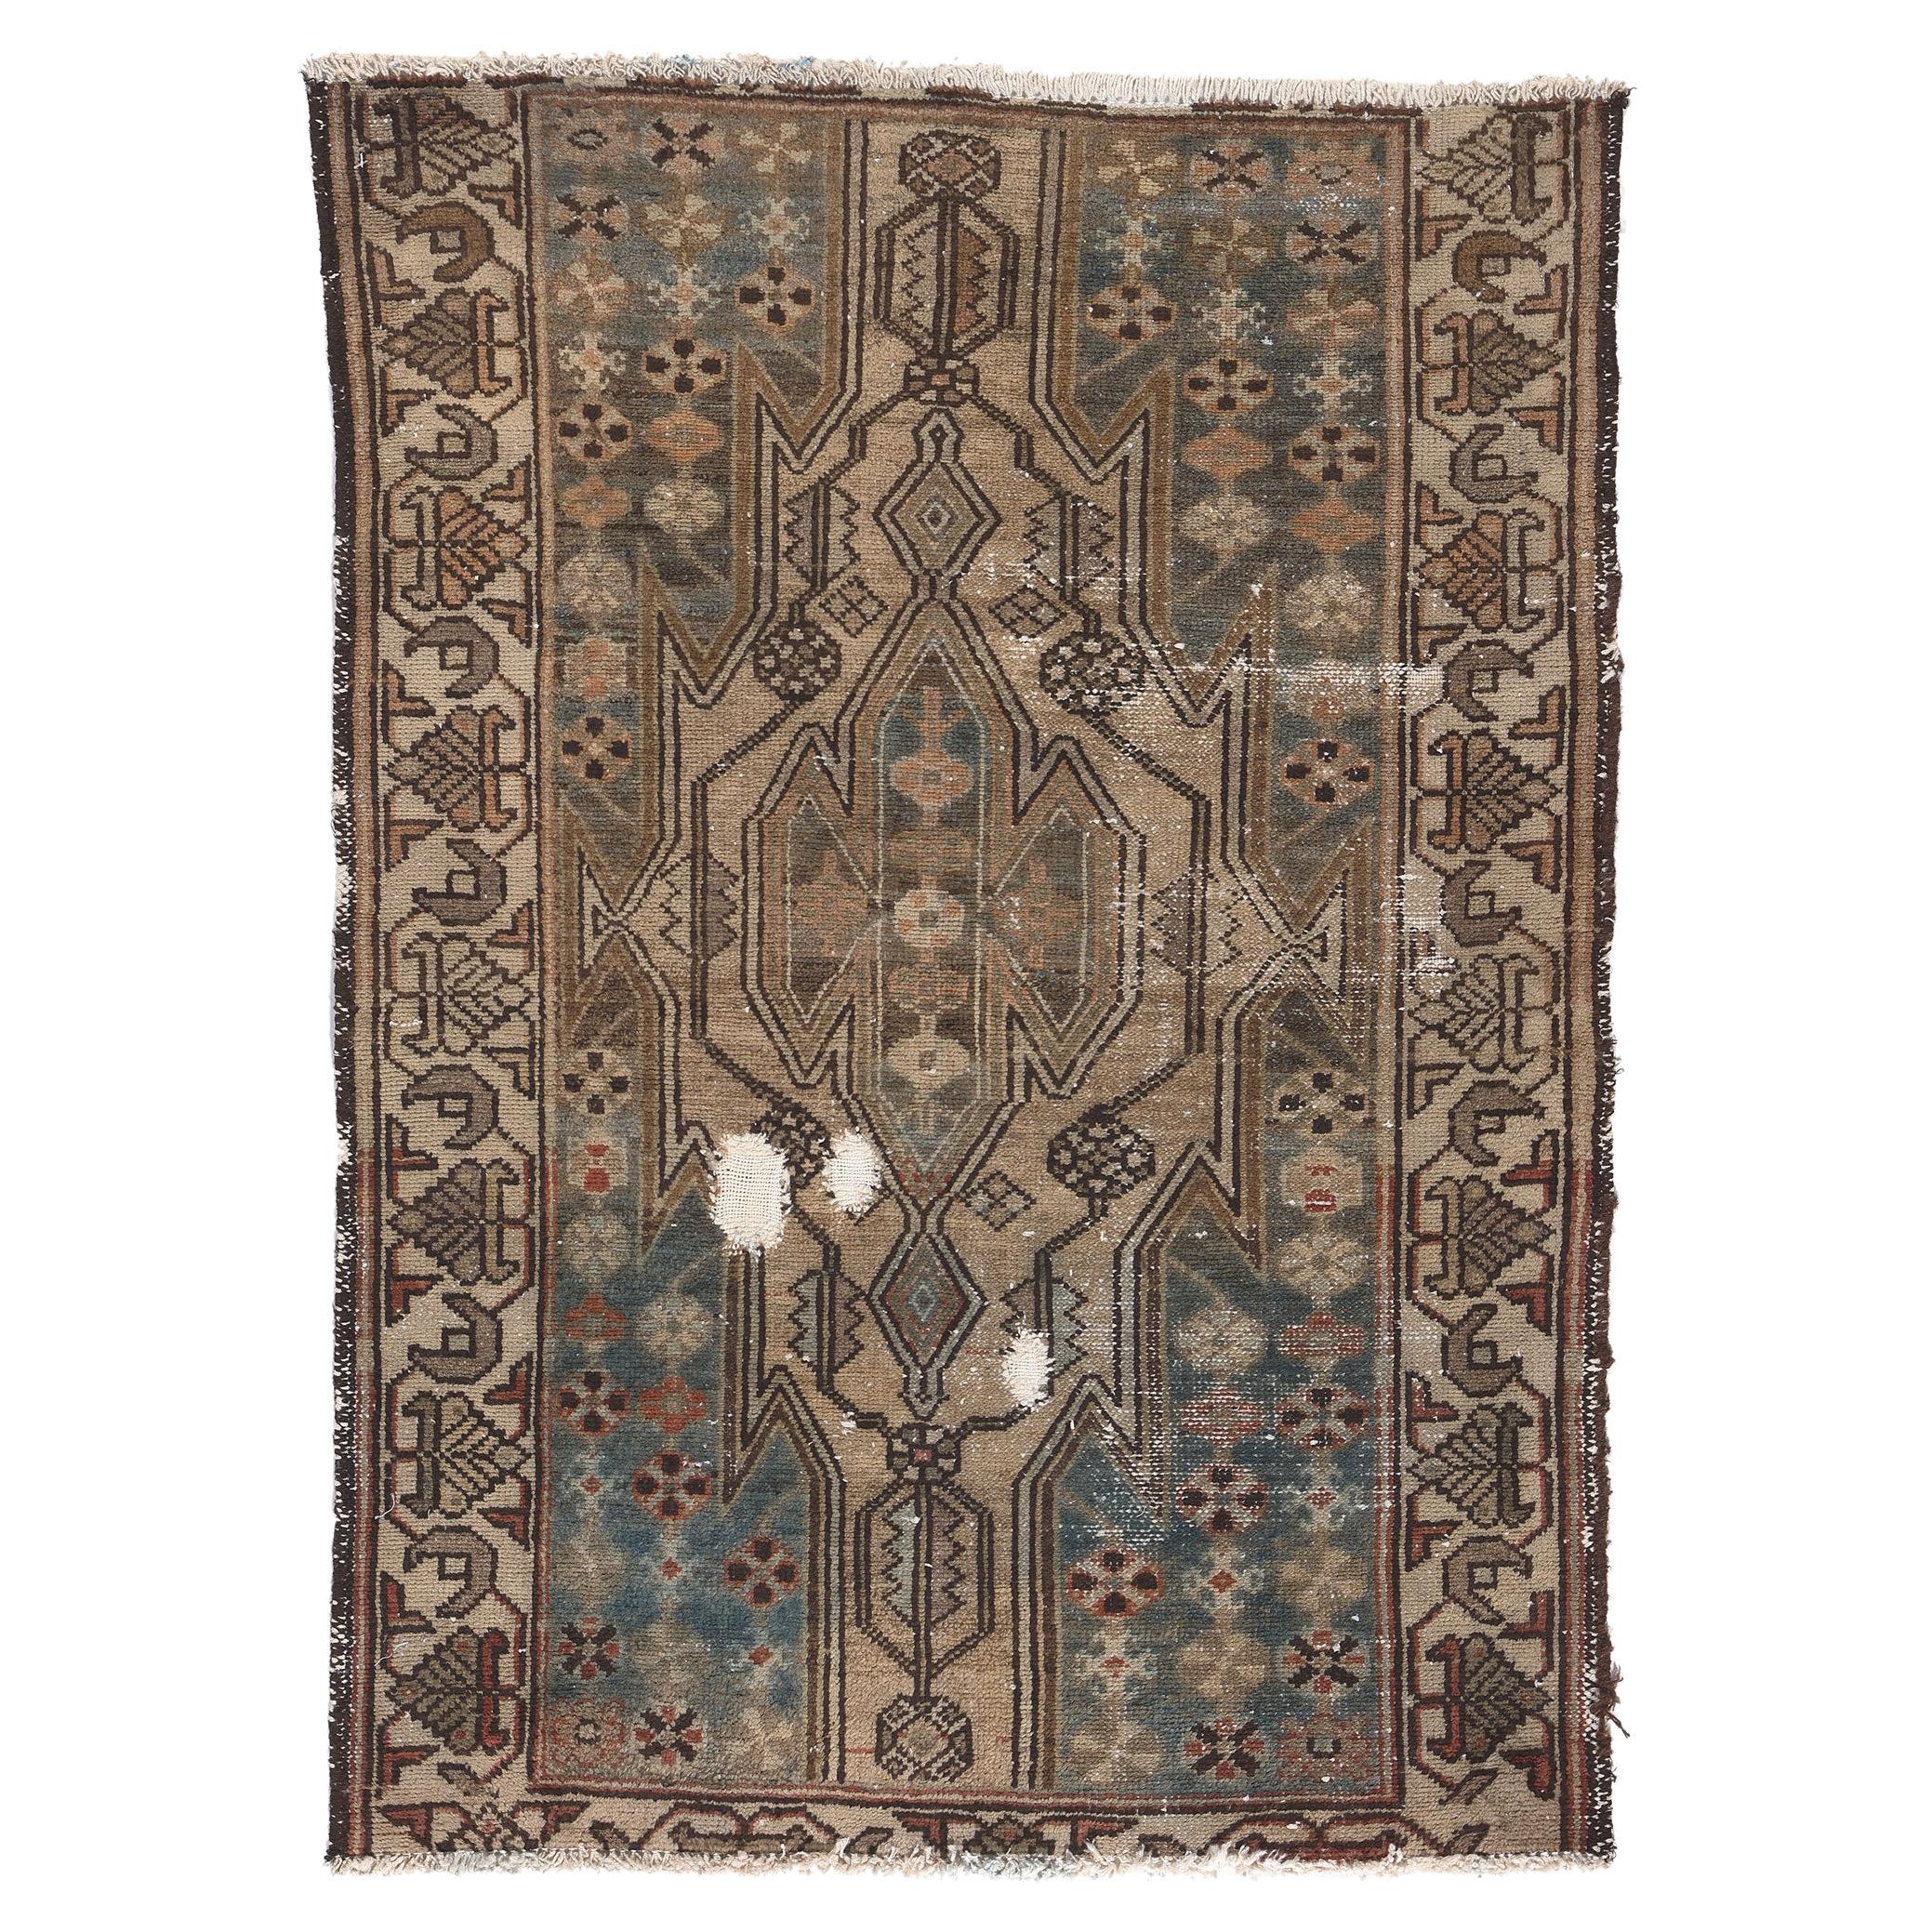 Antique Worn Persian Tribal Hamadan Rug, Rugged Beauty Meets Nomadic Charm For Sale